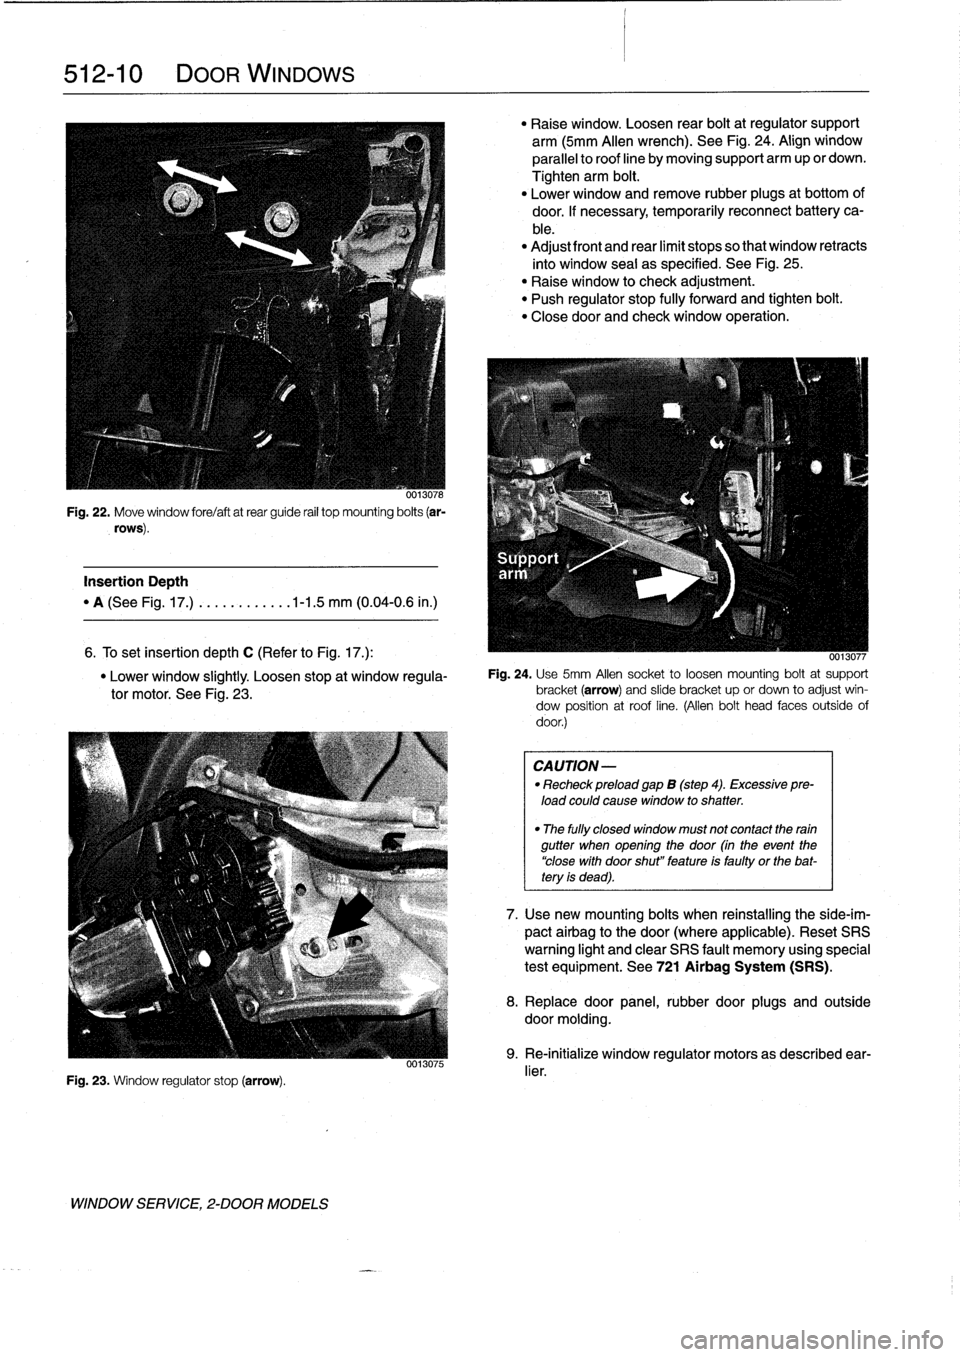 BMW 318i 1997 E36 Owners Manual 
512-
1
0

	

DOOR
WINDOWS

0013078

Fig
.
22
.
Move
window
fore/aftatrear
guide
rail
top
mounting
bolts
(ar-

rows)
.

Insertion
Depth

"
A
(See
Fig
.
17
.)
.
..........
.1-1
.5
mm
(0
.04-0
.6
in
.)
